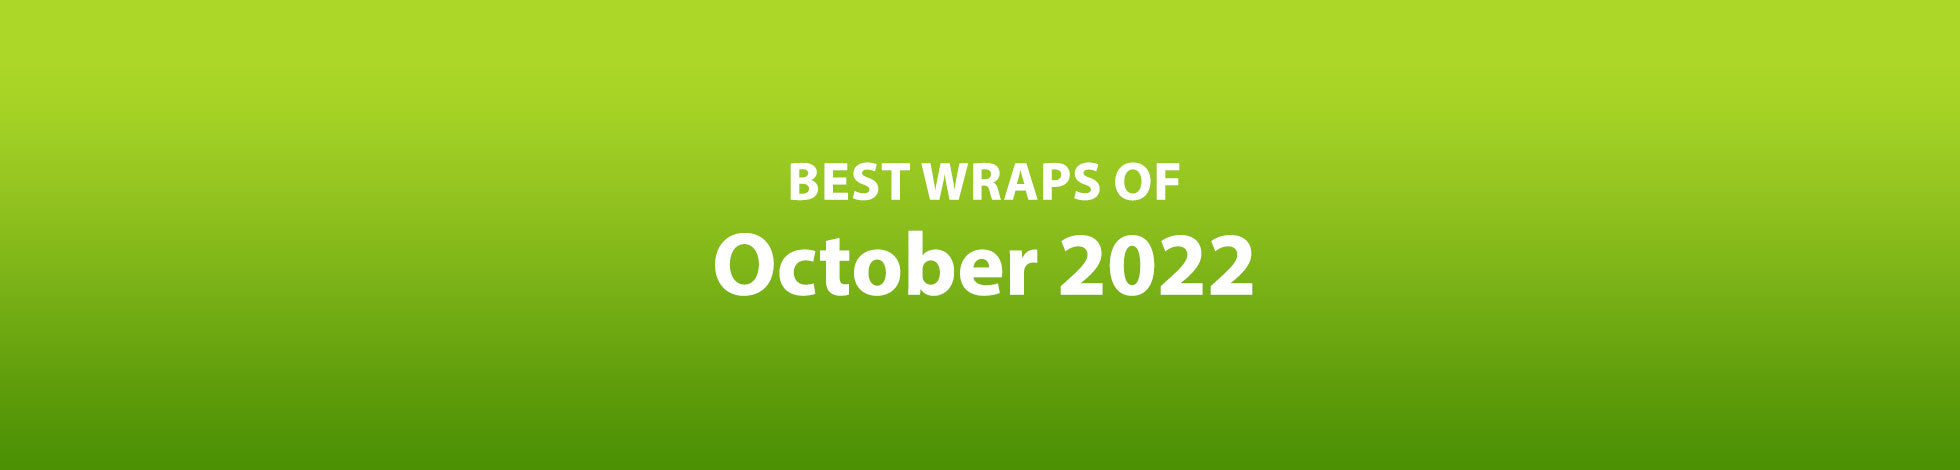 Top Cars Wraps of October 2022